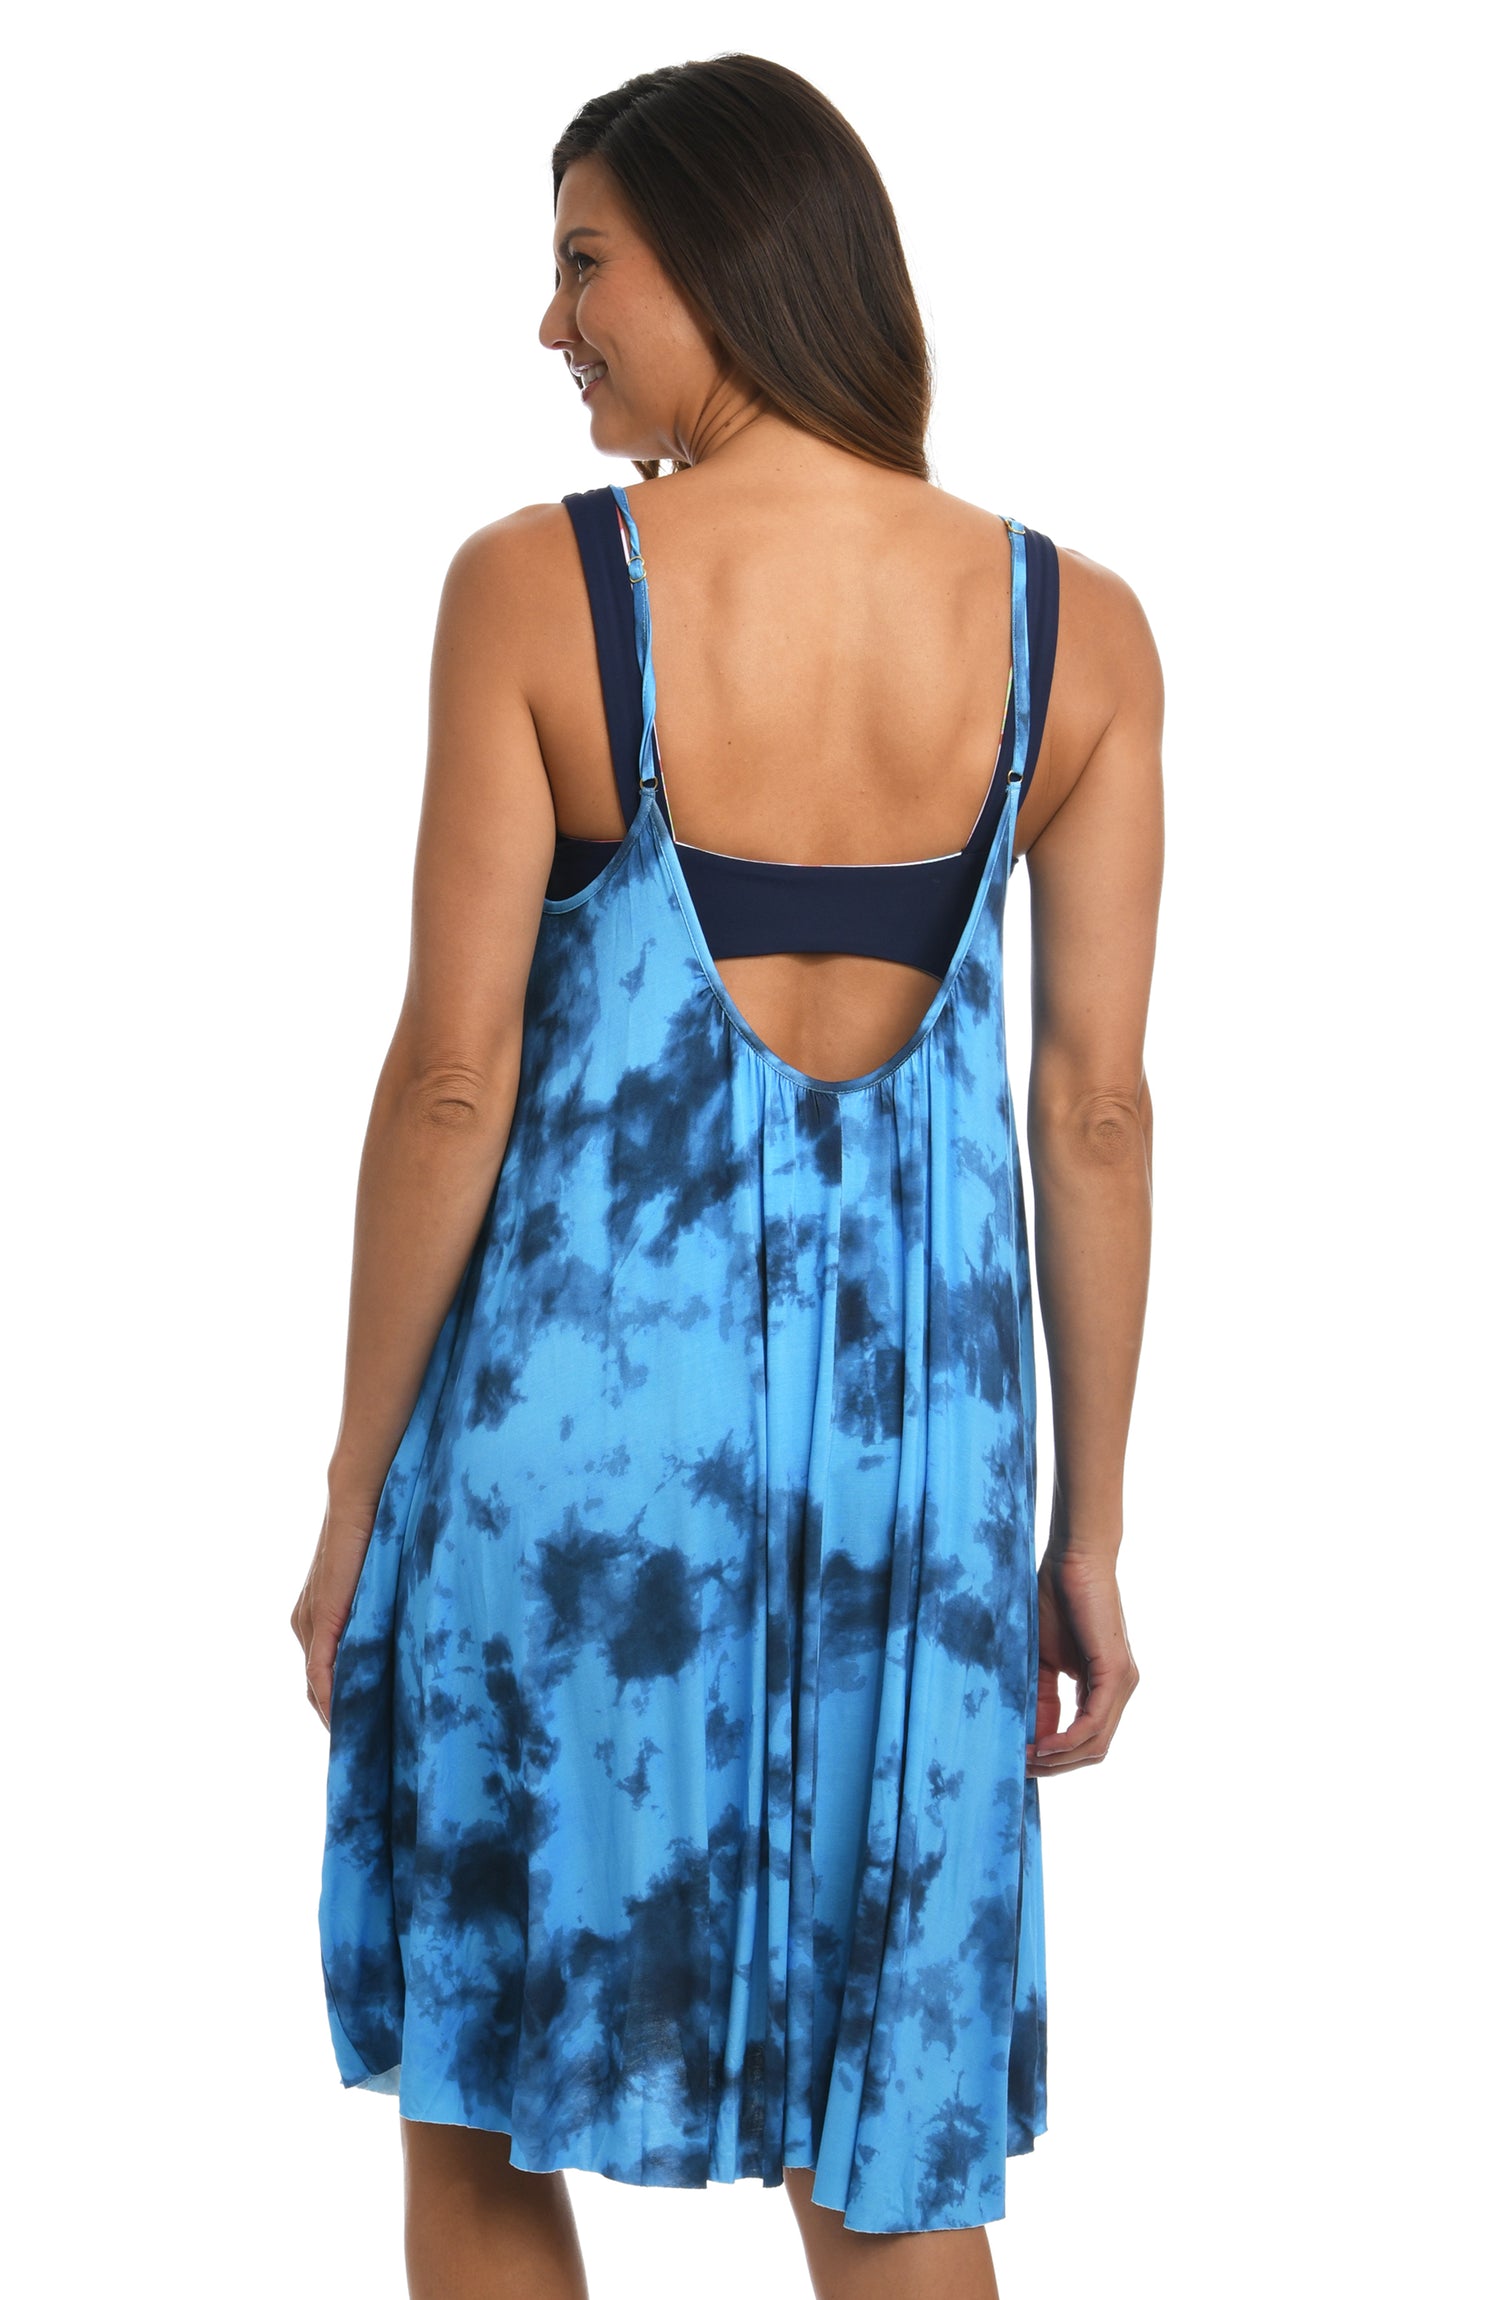 Model is wearing a blue dreamy cloud-inspired printed trapeze dress swimsuit cover up from our Head in the Clouds collection.